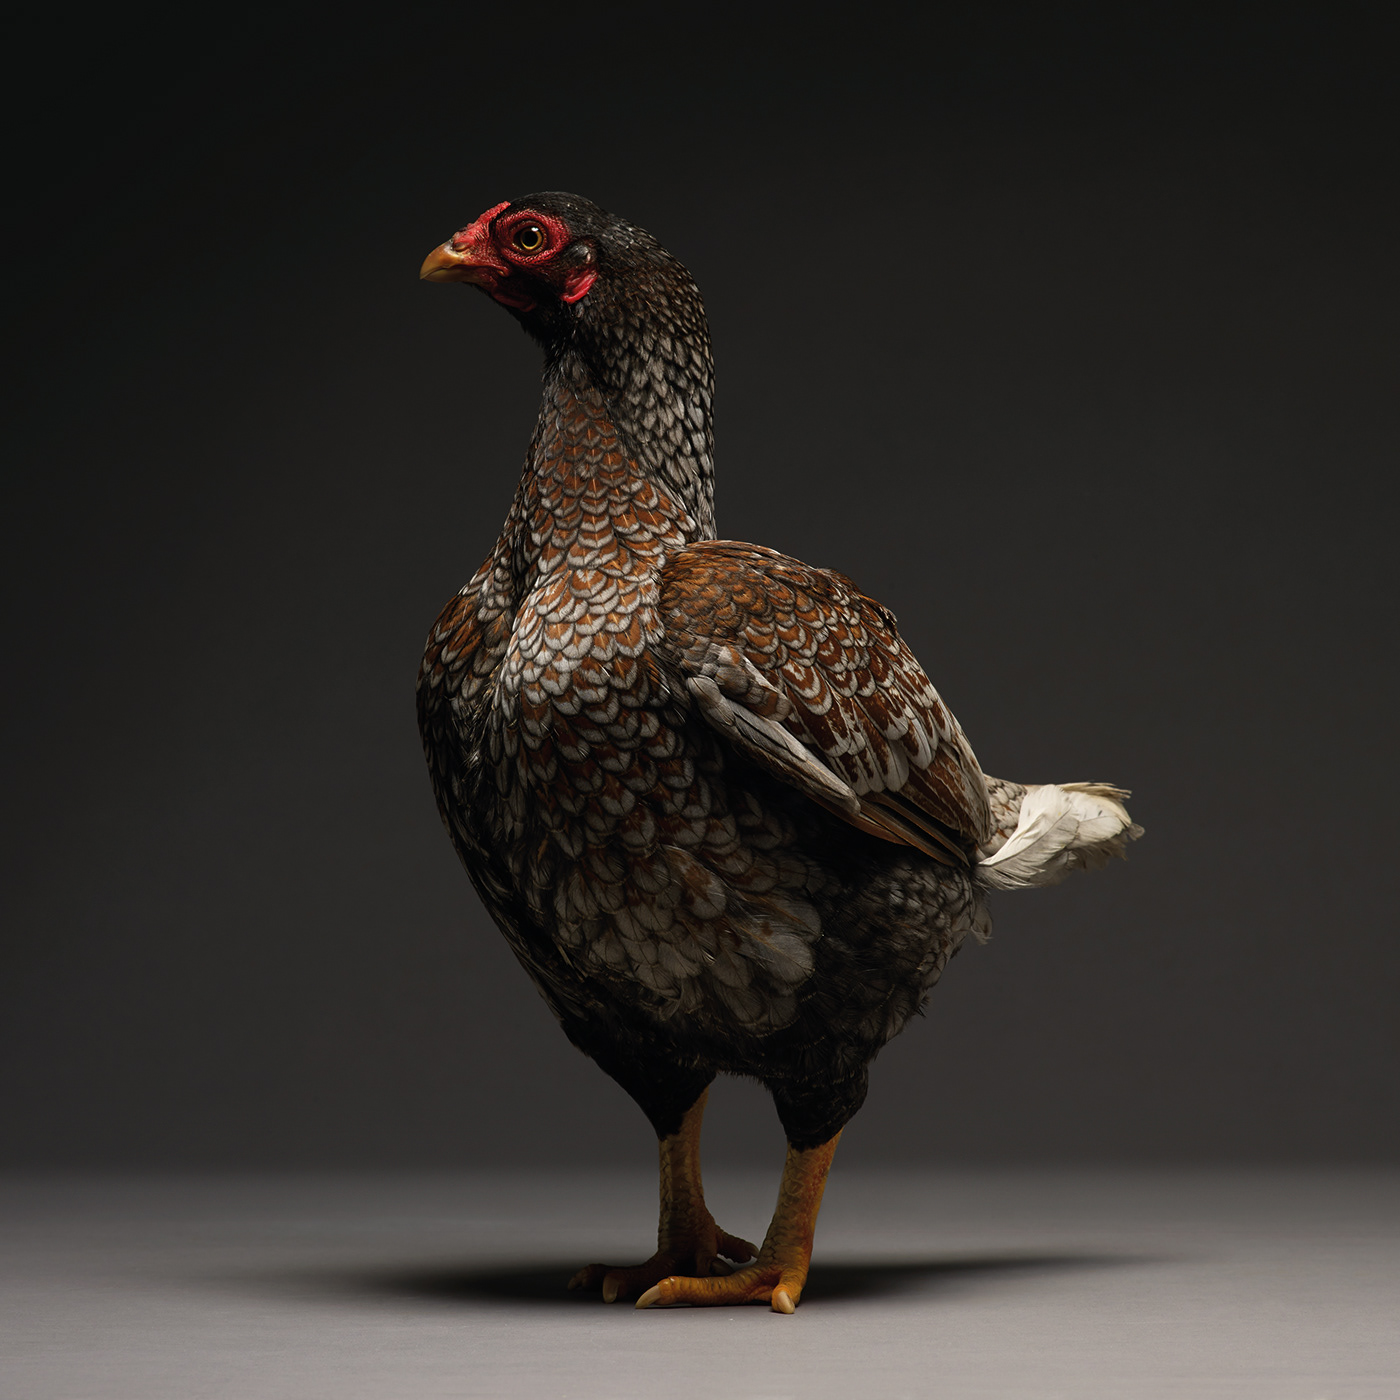 animals book chicken coffe images photographic post Shadows spotlight table